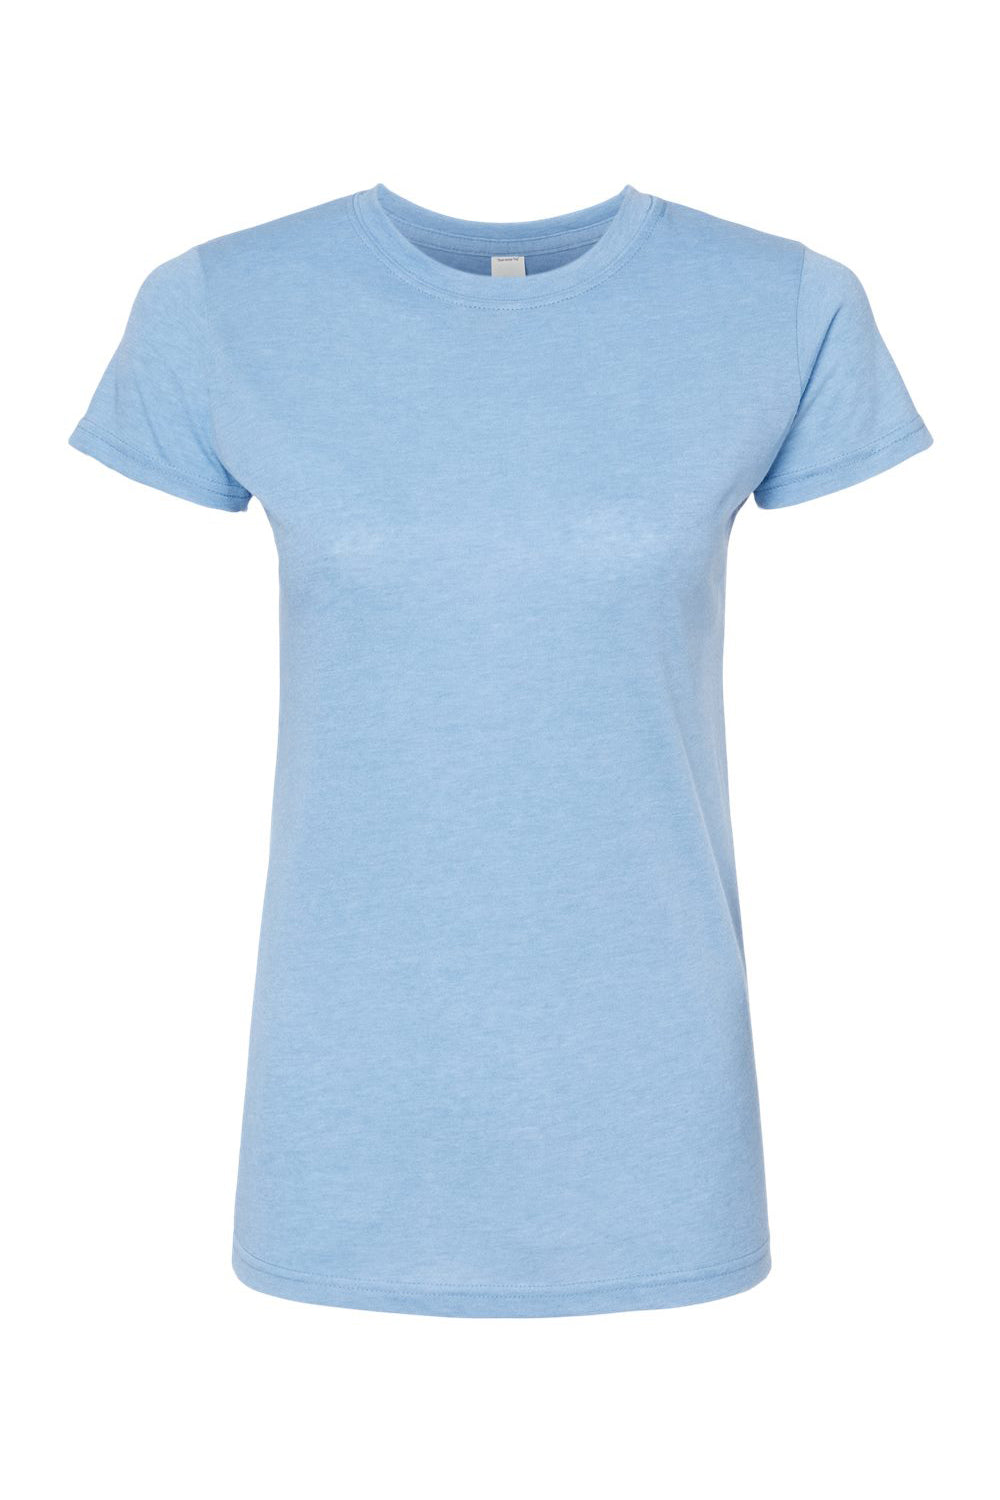 Tultex 240 Womens Poly-Rich Short Sleeve Crewneck T-Shirt Heather Athletic Blue Flat Front